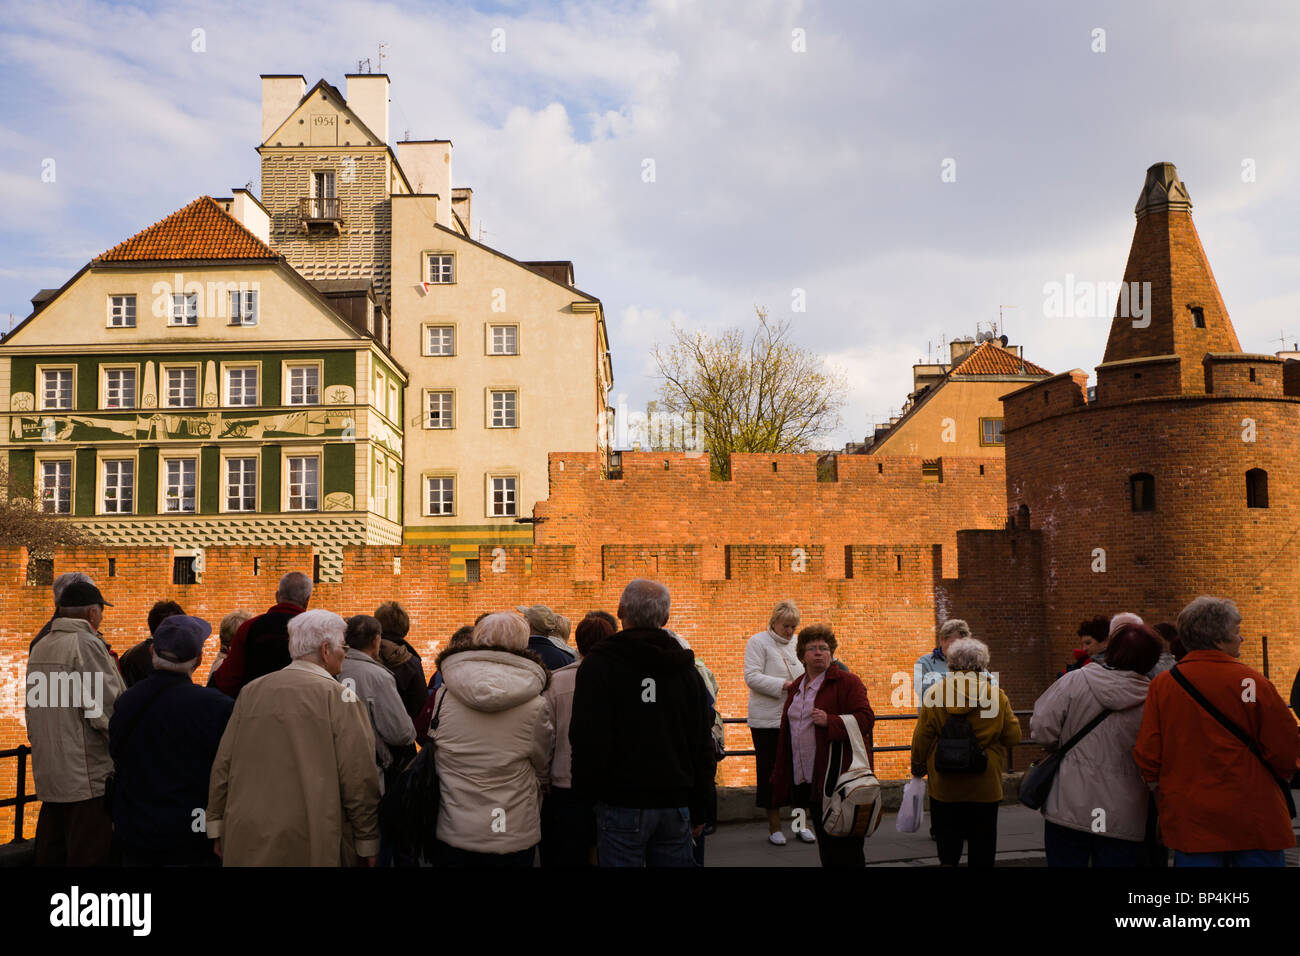 Old town defensive walls, Warsaw Poland. Stock Photo